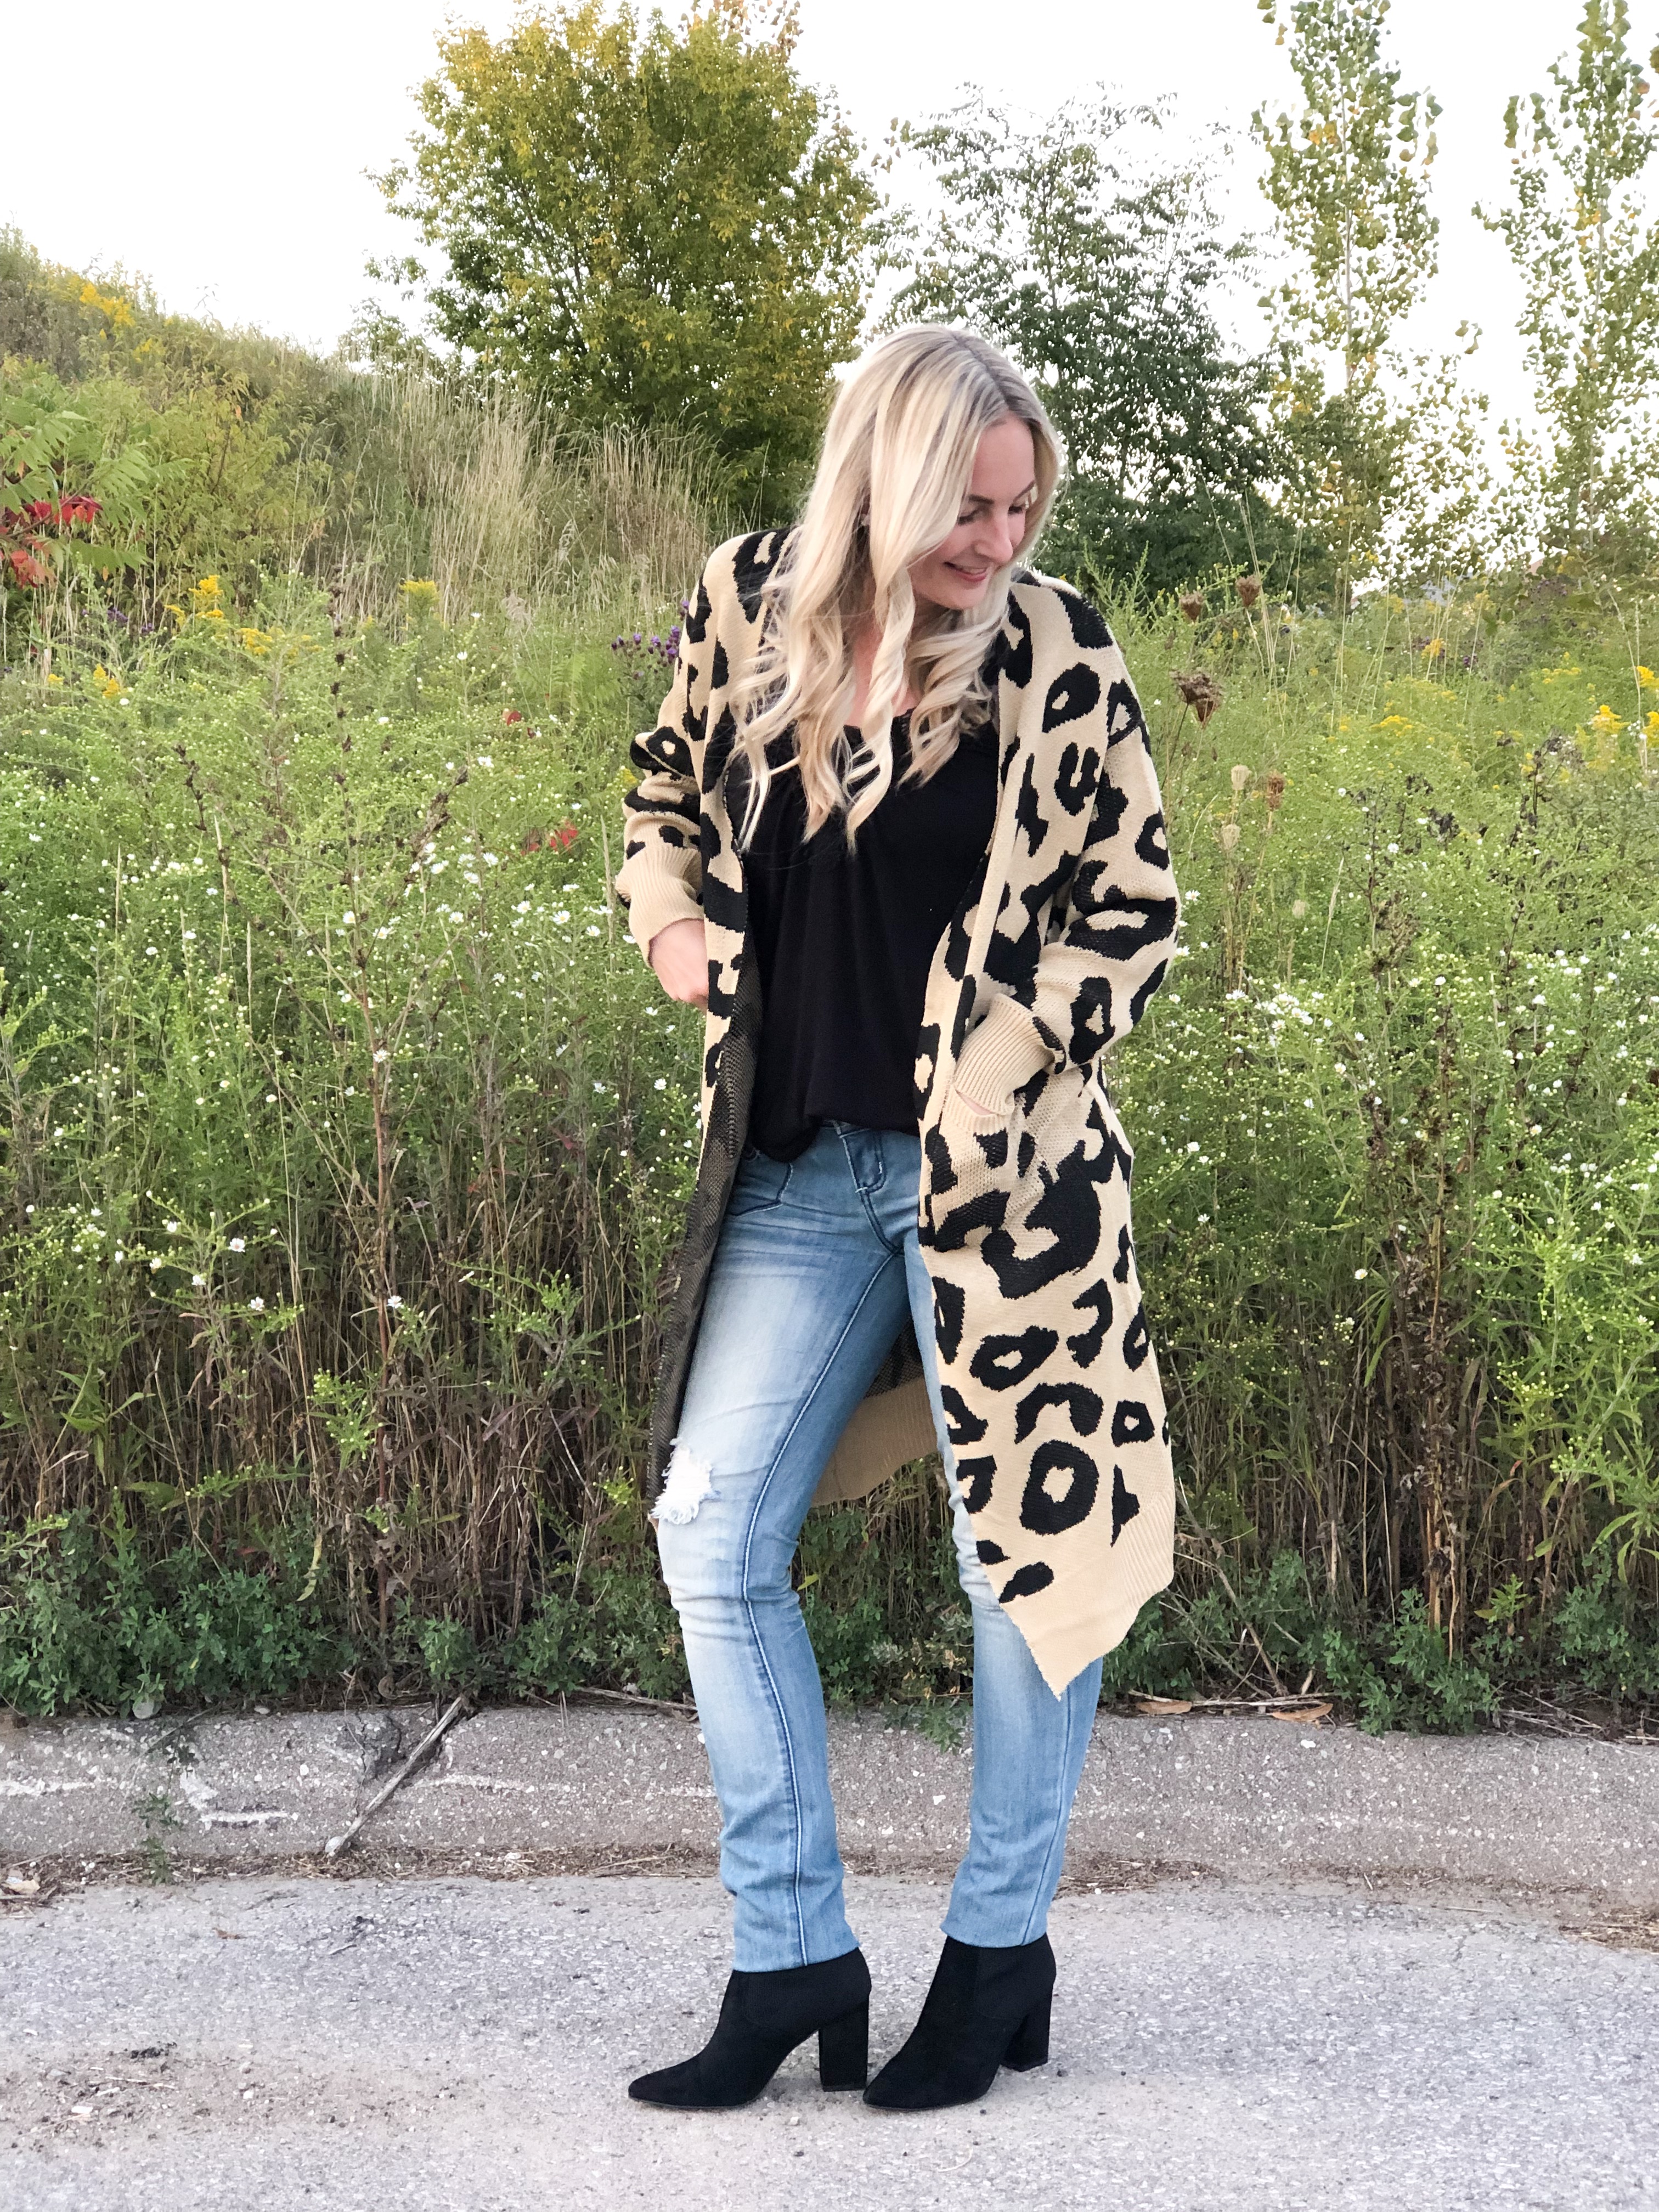 Leopard Print Cardigan from Amazon on Livin' Life with Style 